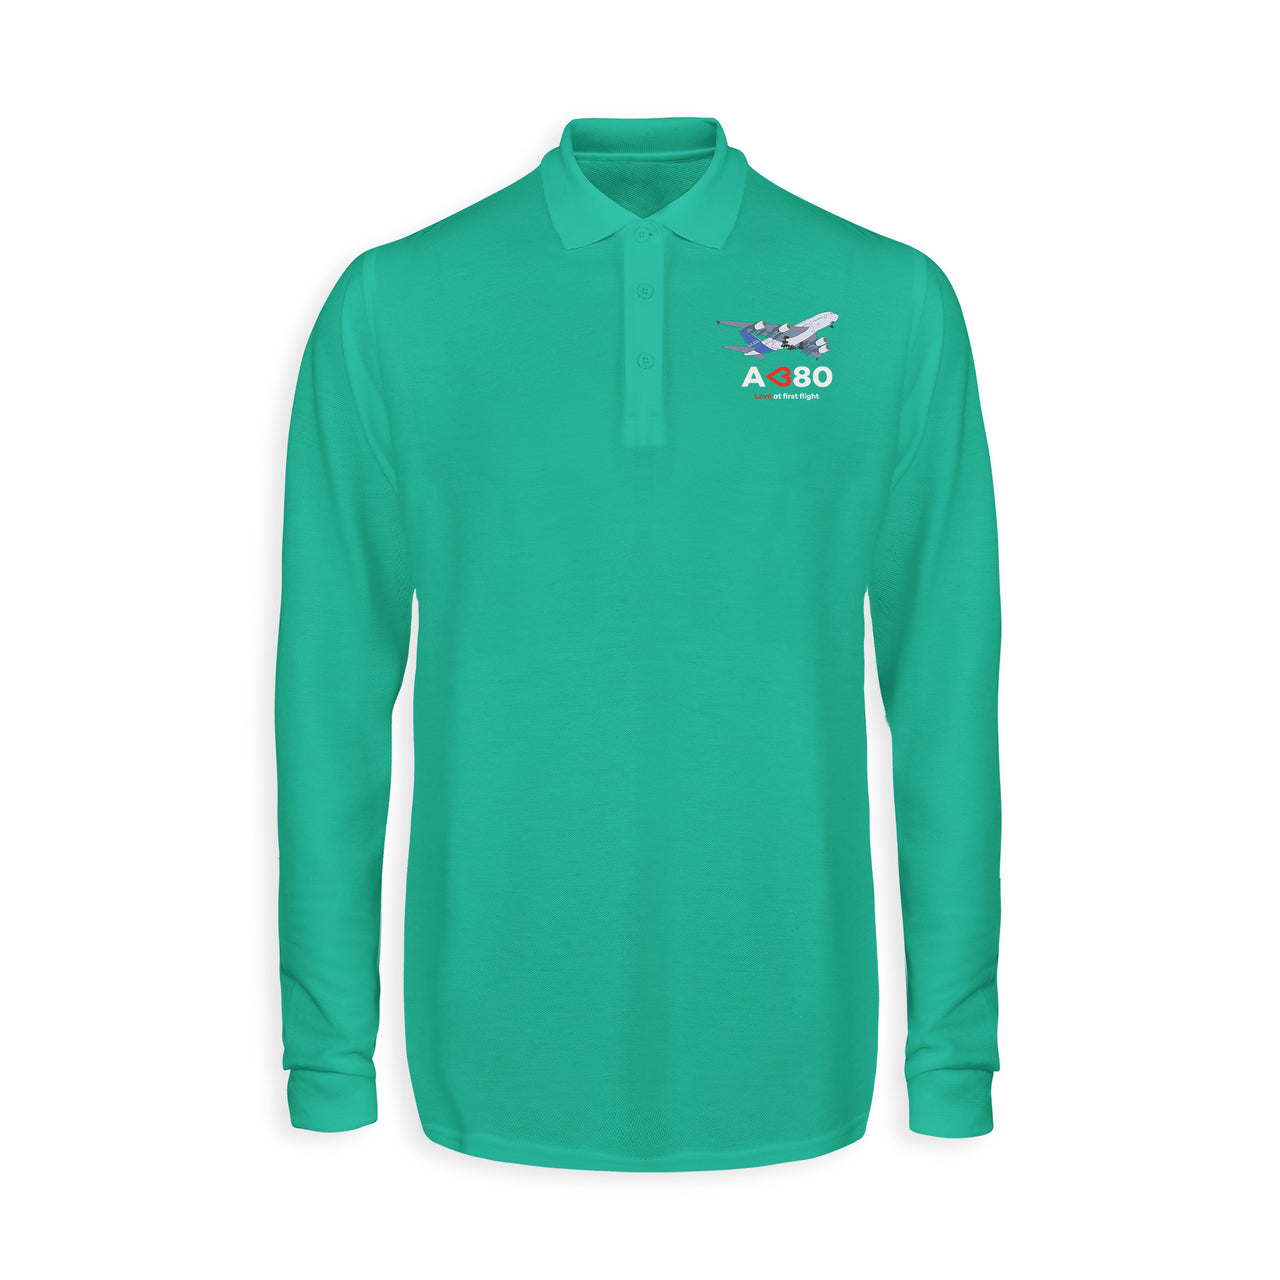 Airbus A380 Love at first flight Designed Long Sleeve Polo T-Shirts